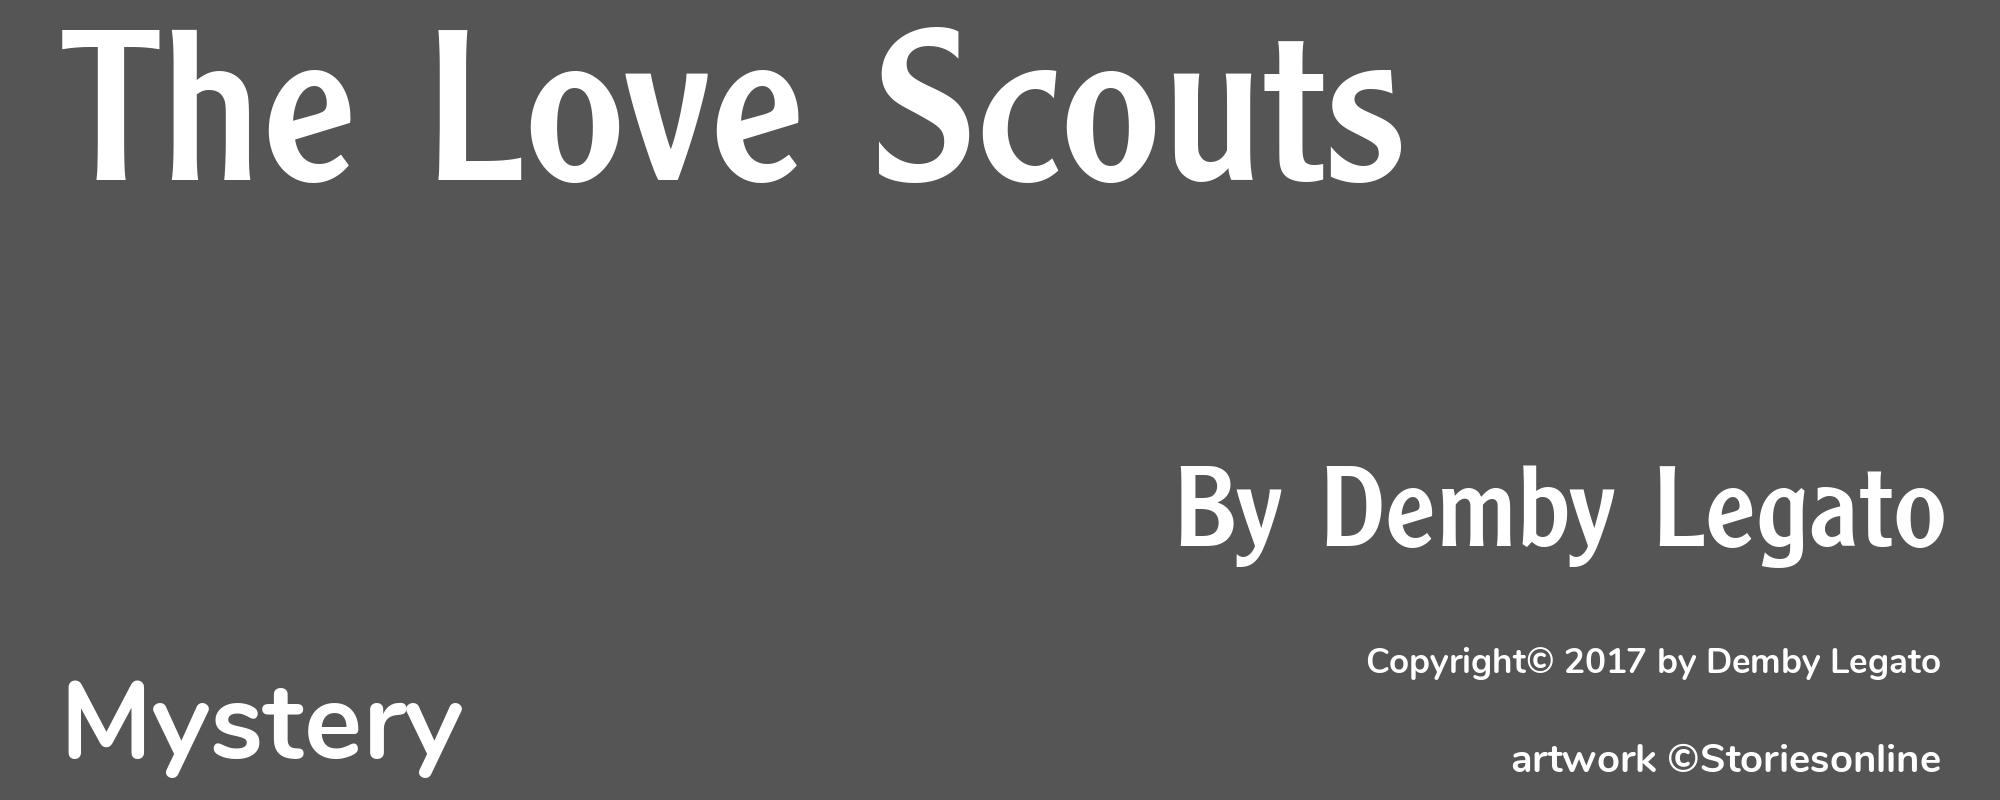 The Love Scouts - Cover